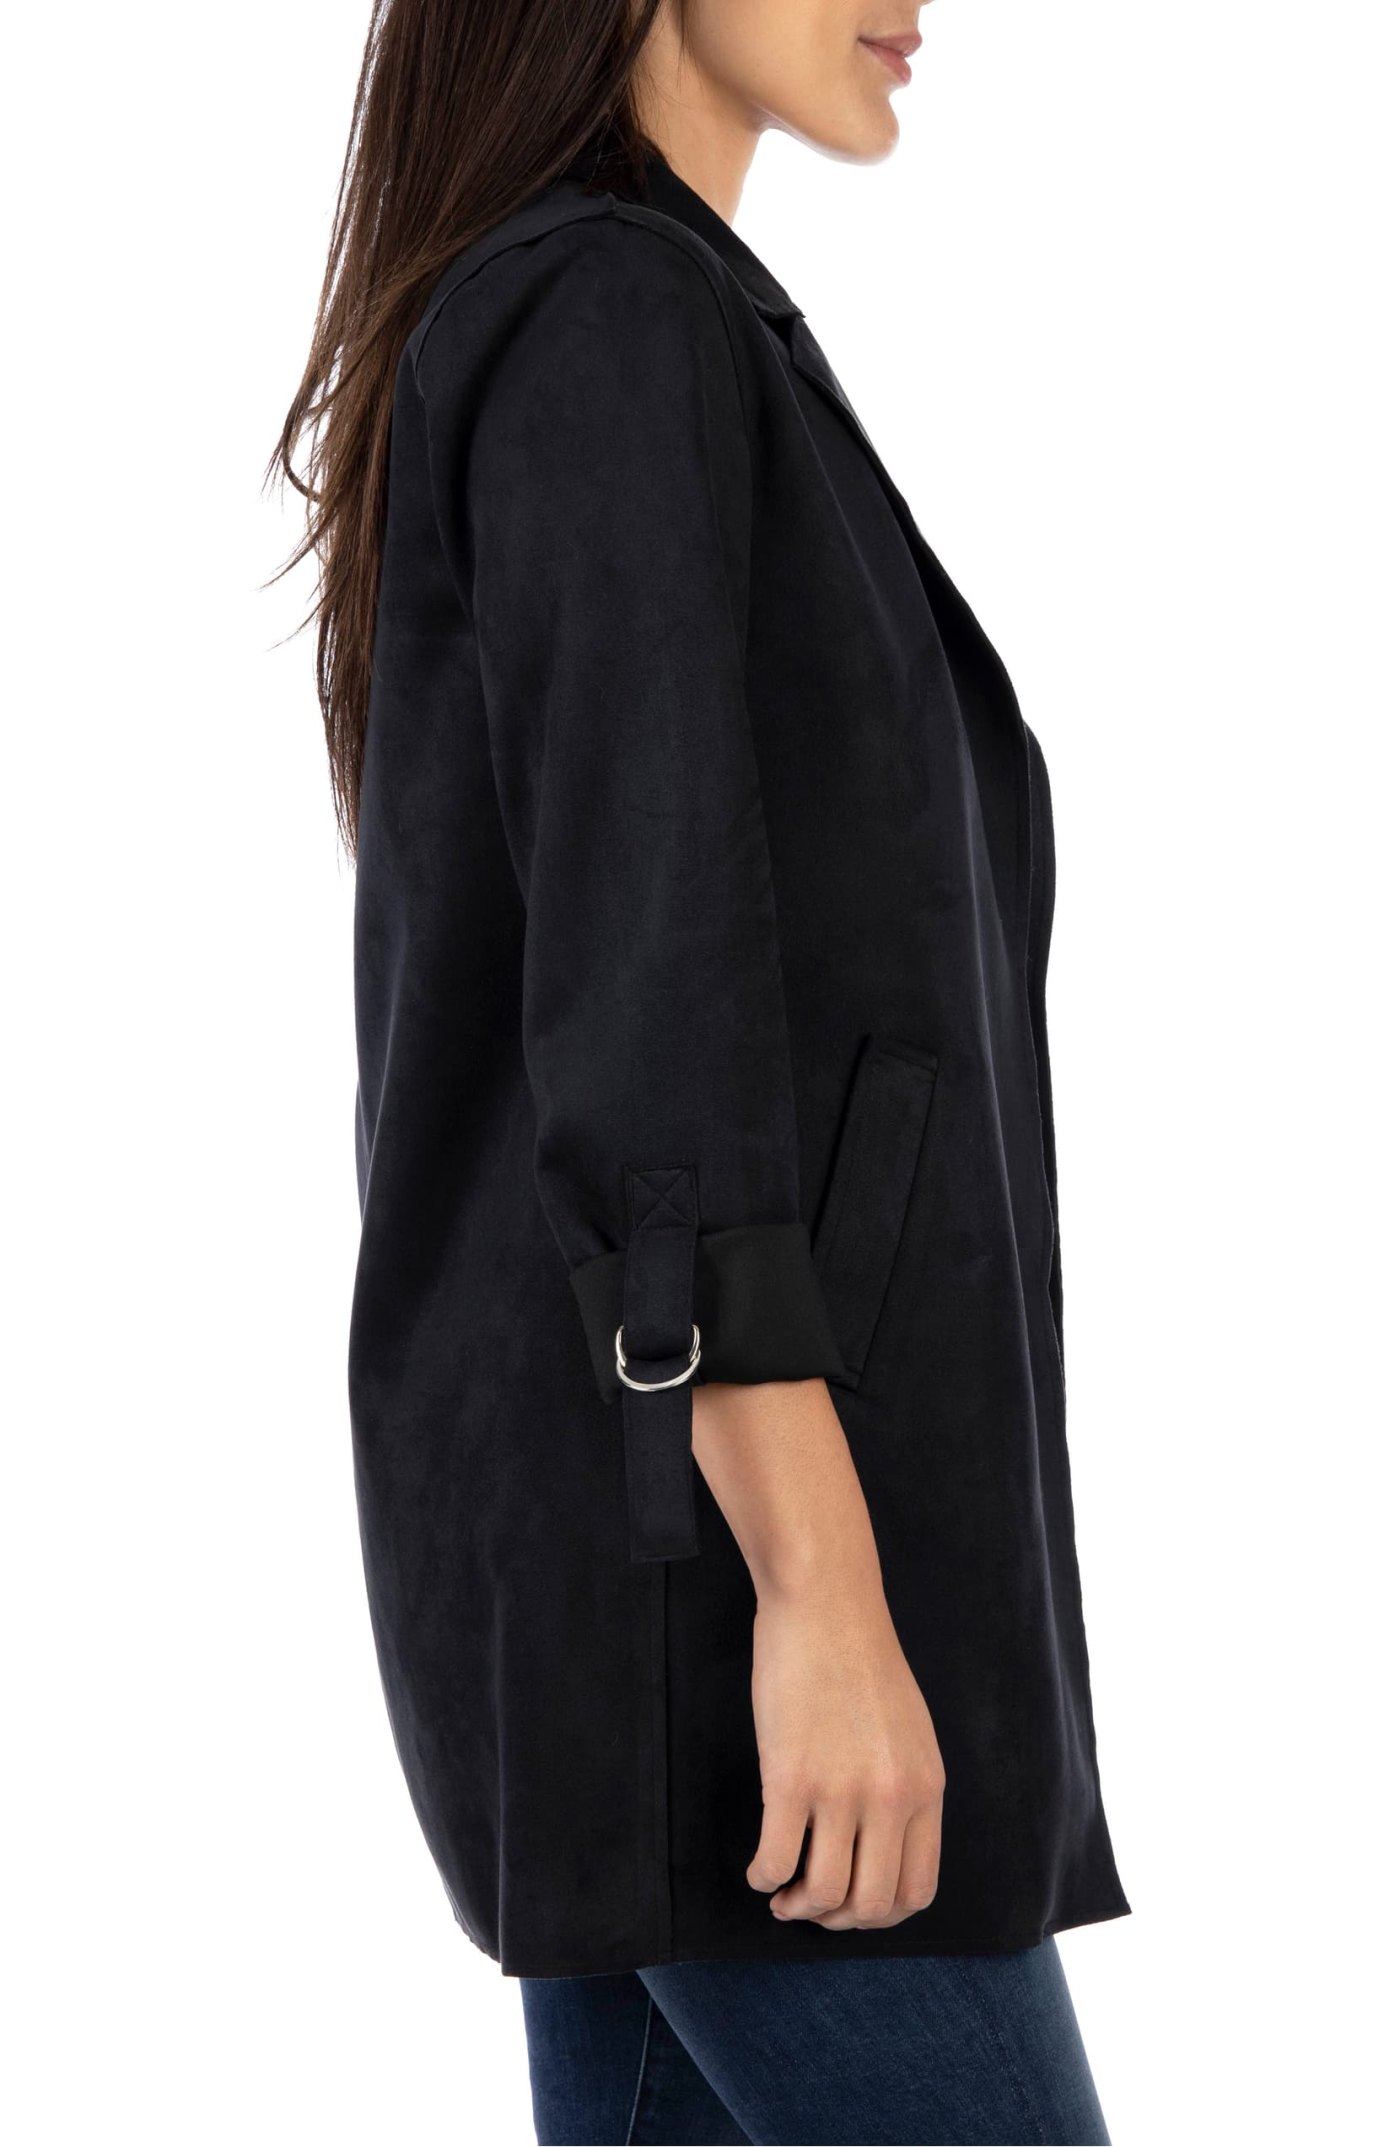 This Faux Suede Jacket Is an Edgy Take On the Standard Blazer